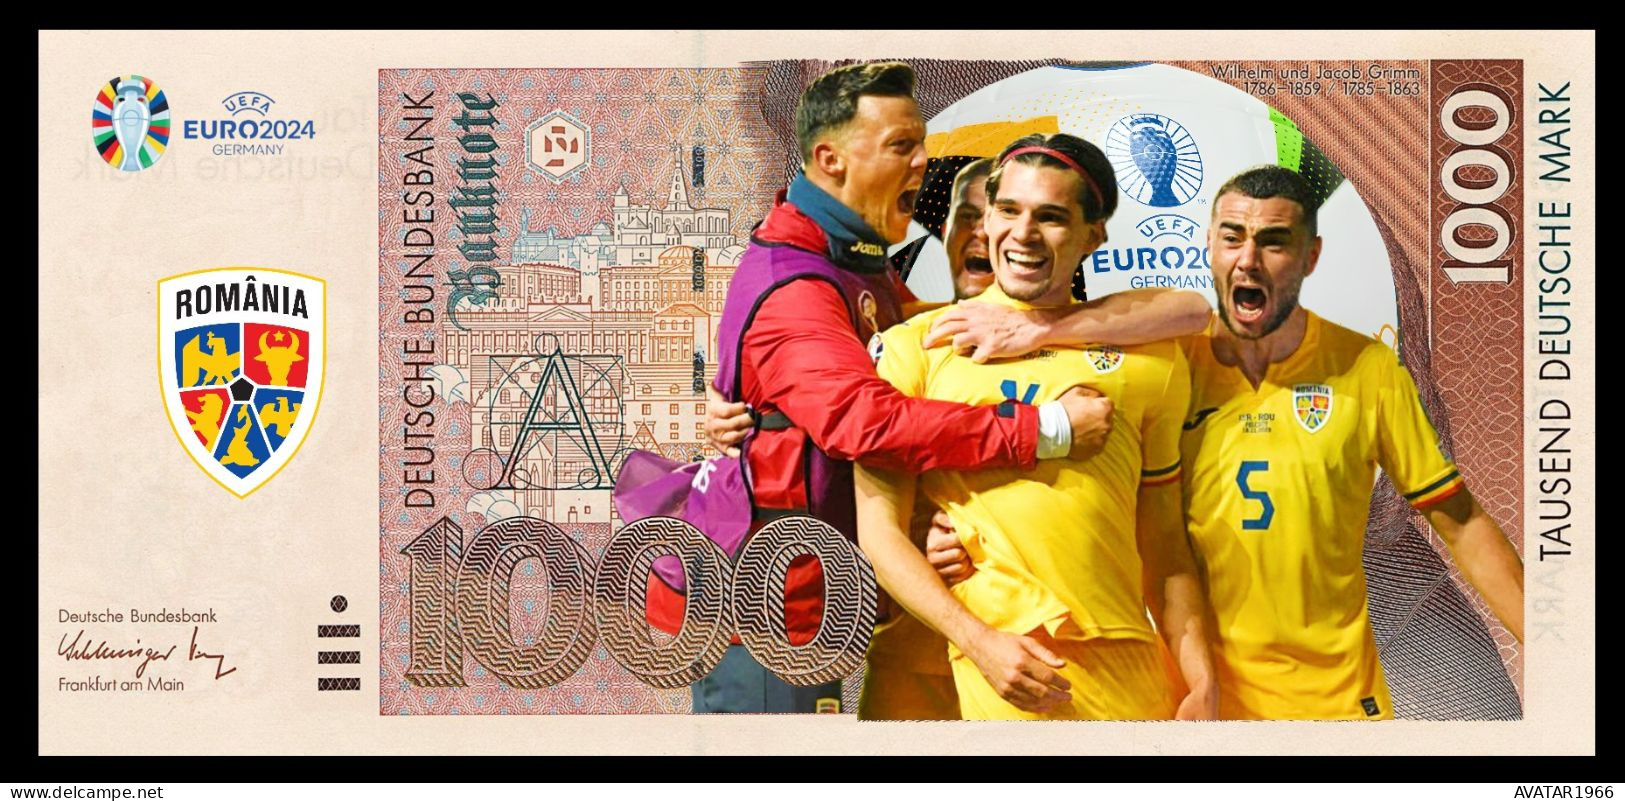 UEFA European Football Championship 2024 Qualified Country Romania 8 Pieces Germany Fantasy Paper Money - [15] Commemoratives & Special Issues